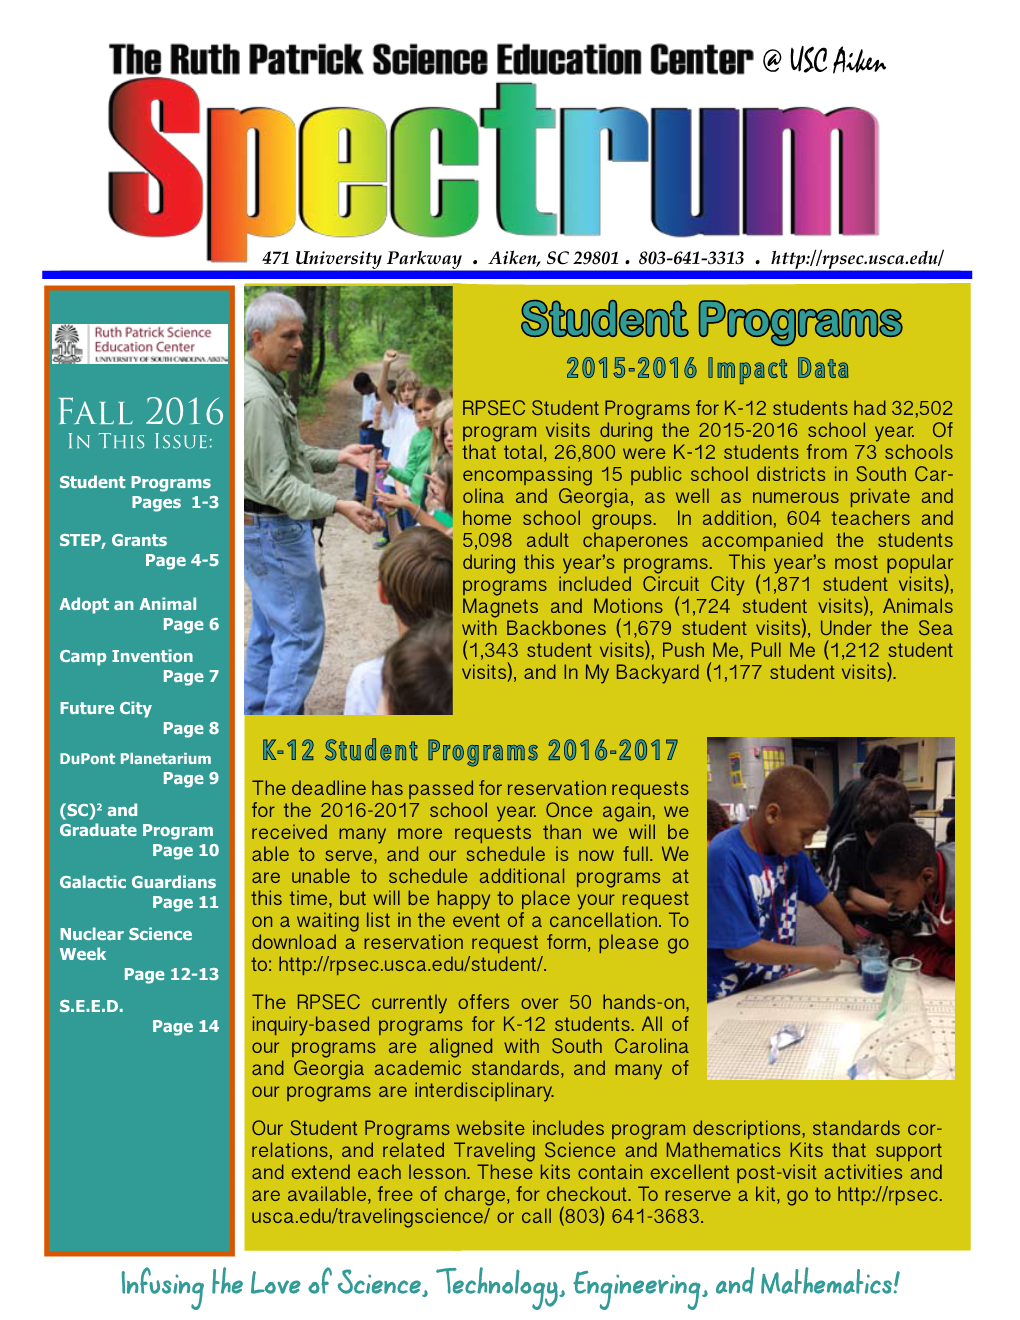 Student Programs 2015-2016 Impact Data Fall 2016 RPSEC Student Programs for K-12 Students Had 32,502 in This Issue: Program Visits During the 2015-2016 School Year